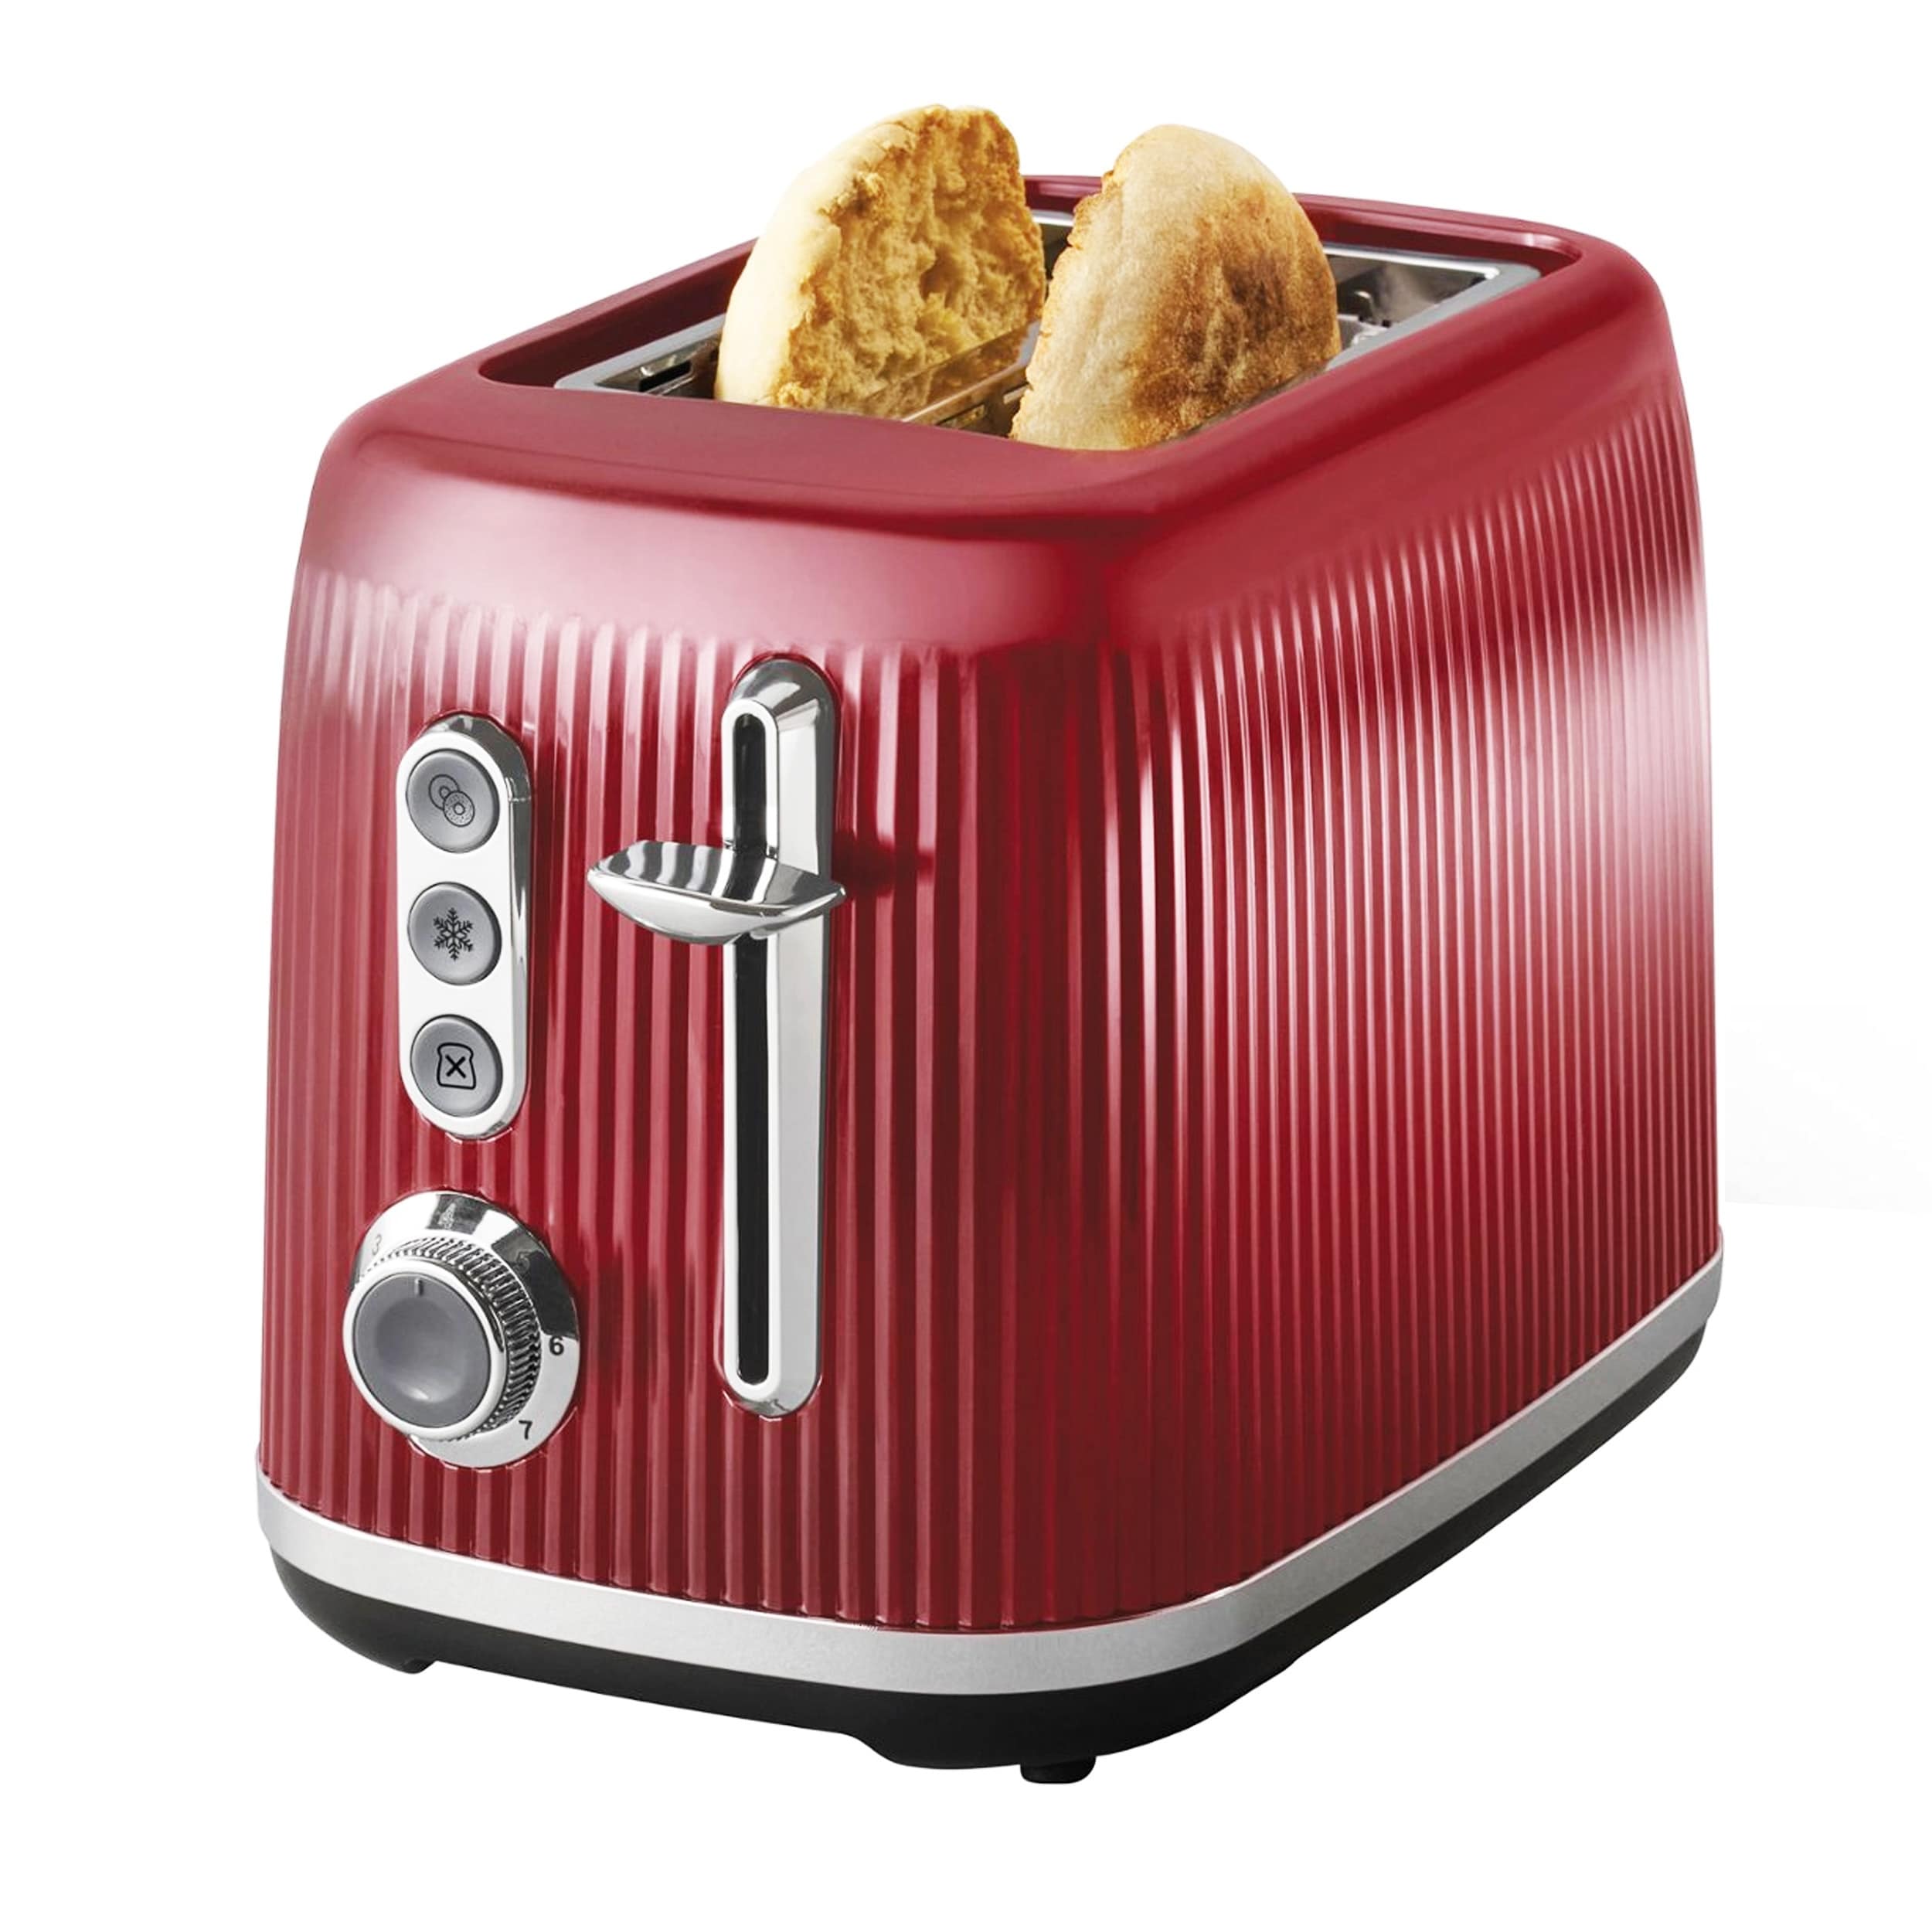 https://ak1.ostkcdn.com/images/products/is/images/direct/f6b194aa00f3bbaa38f90a258e703e27dada86d3/Oster-Retro-2-Slice-Toaster-with-Extra-Wide-Slots-in-Red.jpg